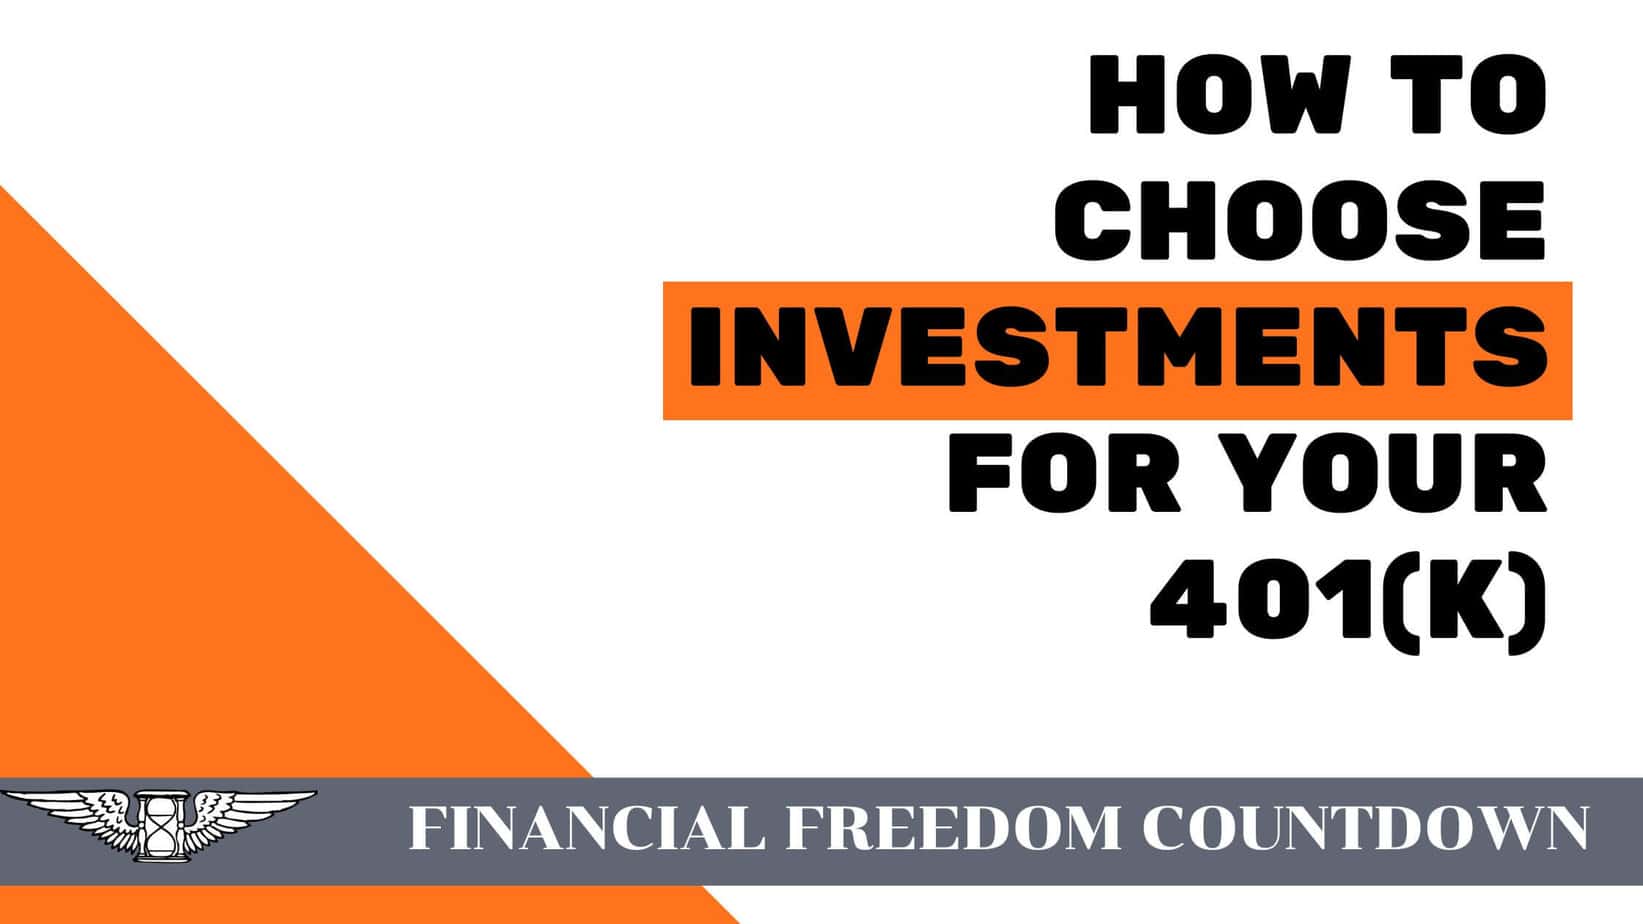 How To Choose Investments for Your 401(k)